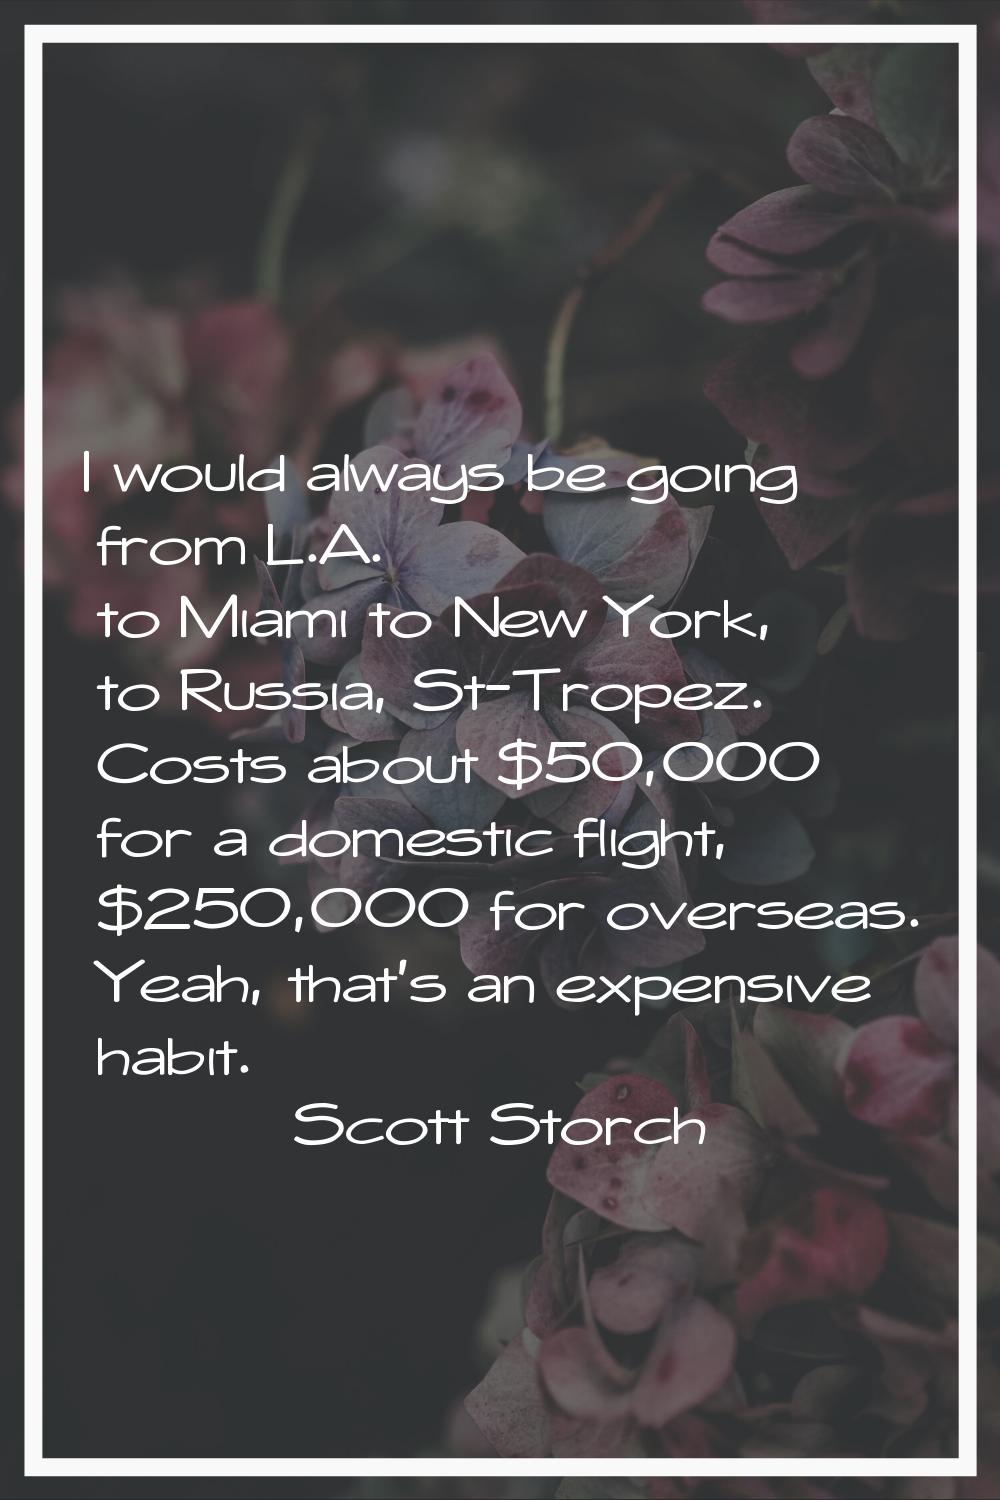 I would always be going from L.A. to Miami to New York, to Russia, St-Tropez. Costs about $50,000 f